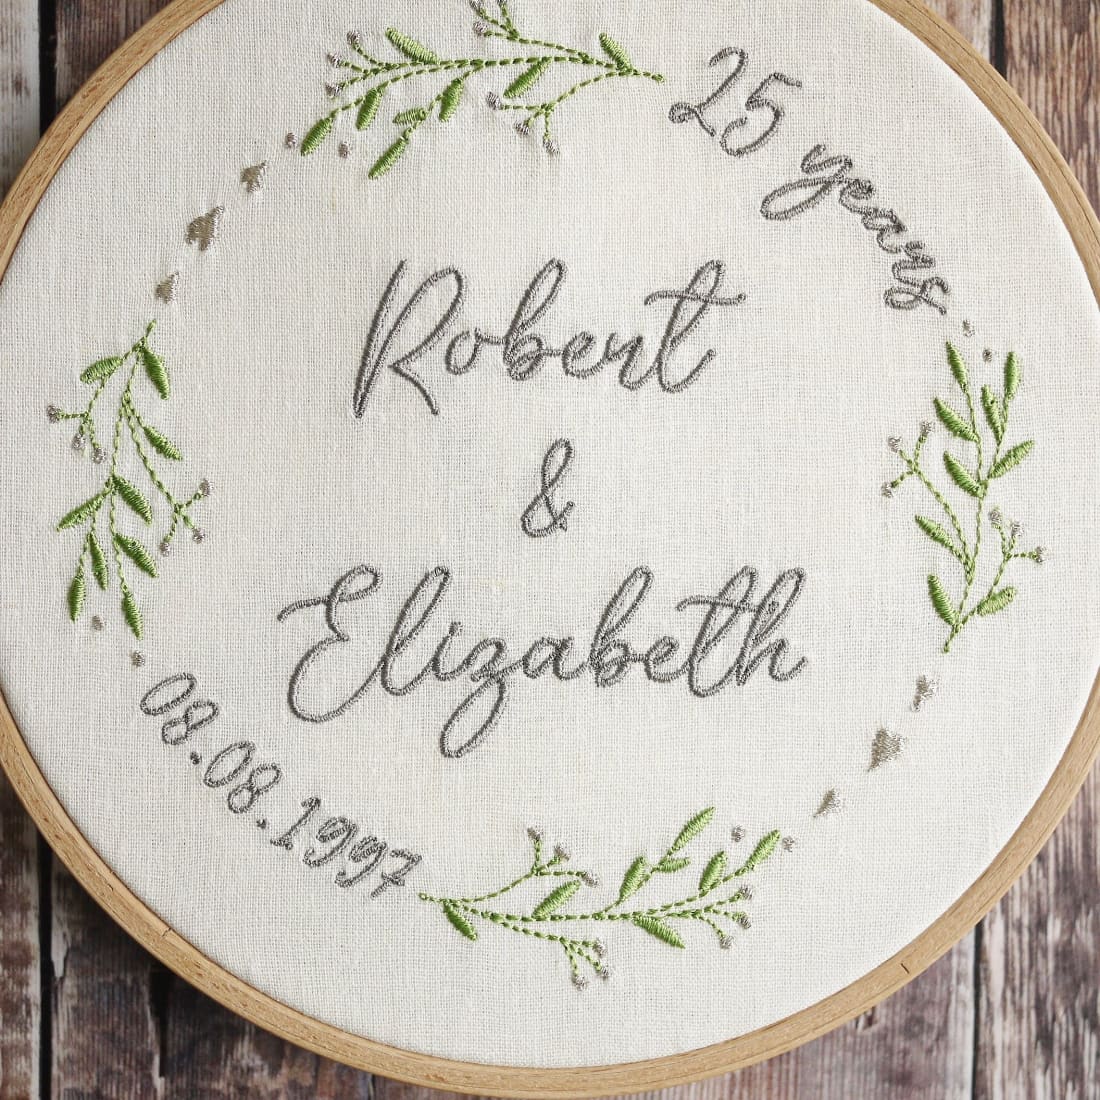 25th Silver Wedding Anniversary Embroidered Plaque 25th 40th and 50th Wedding Anniversary Gifts